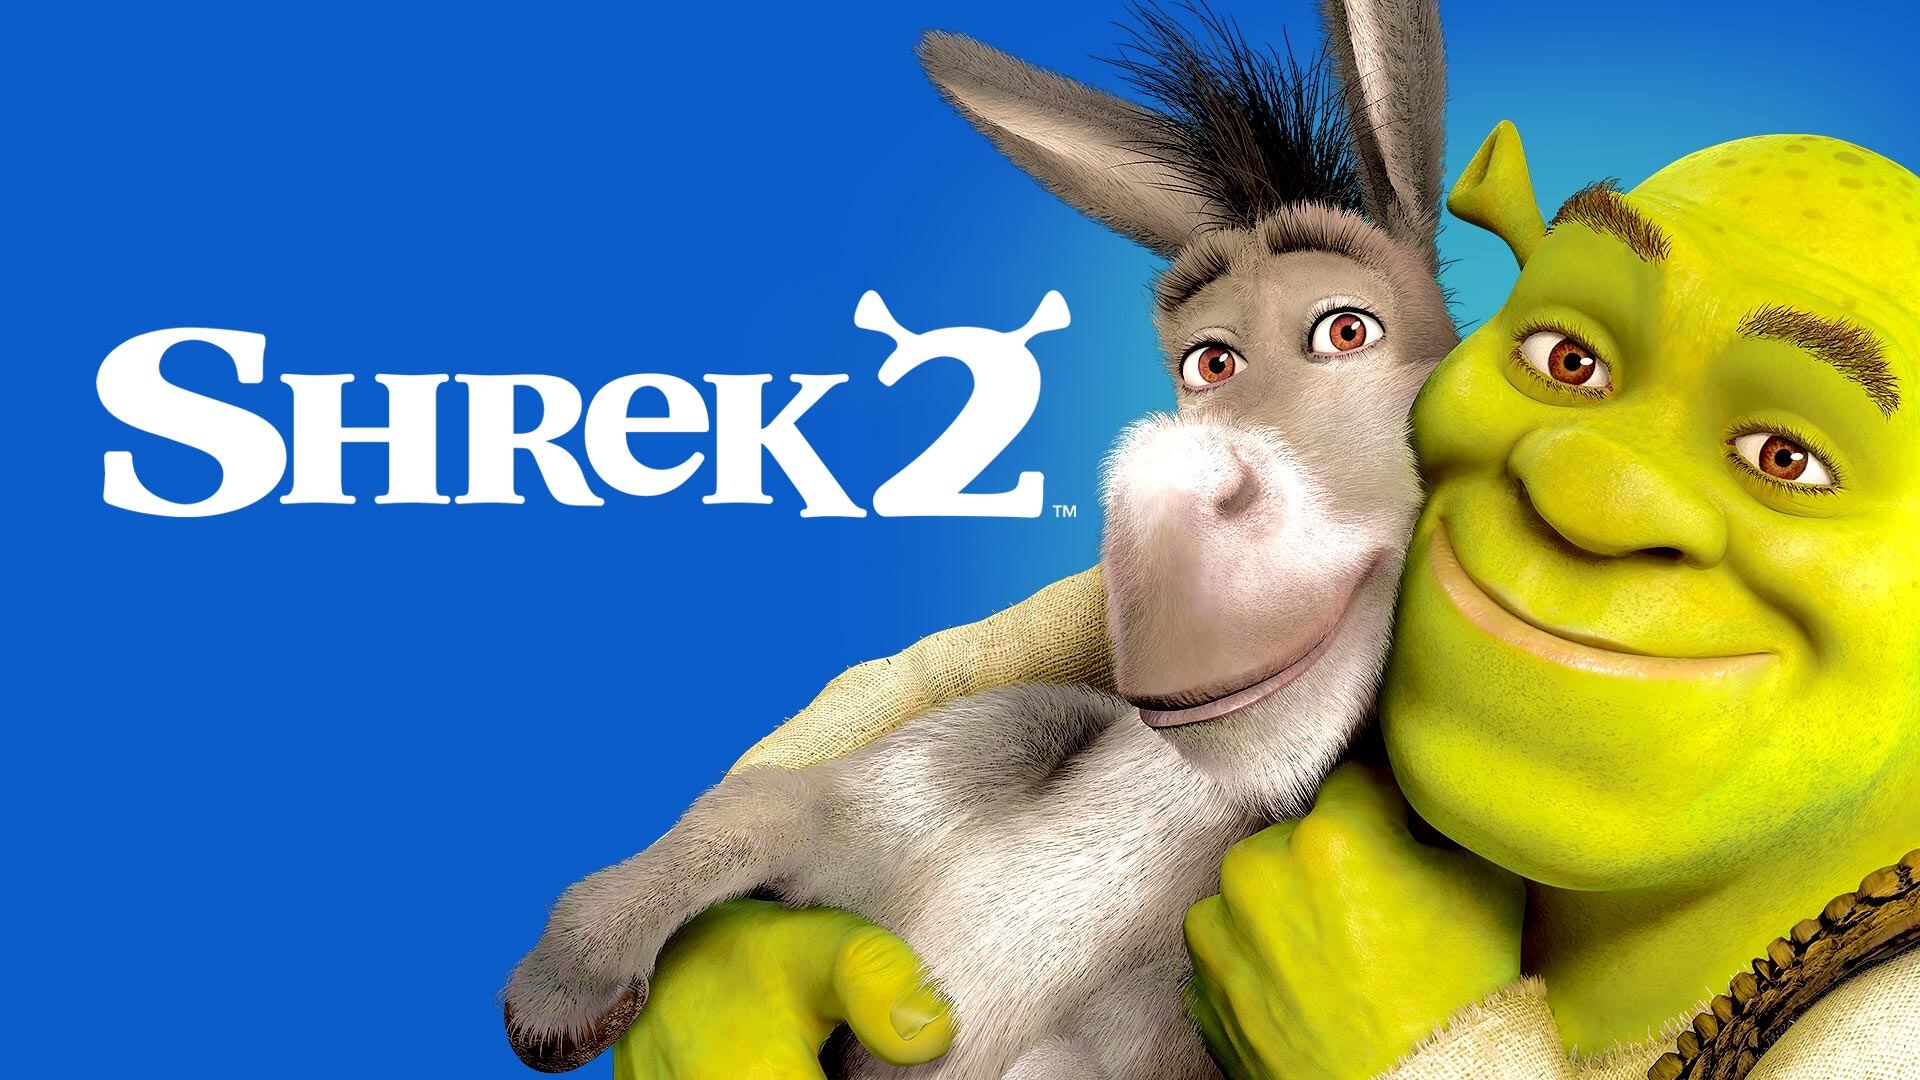 49-facts-about-the-movie-shrek-2